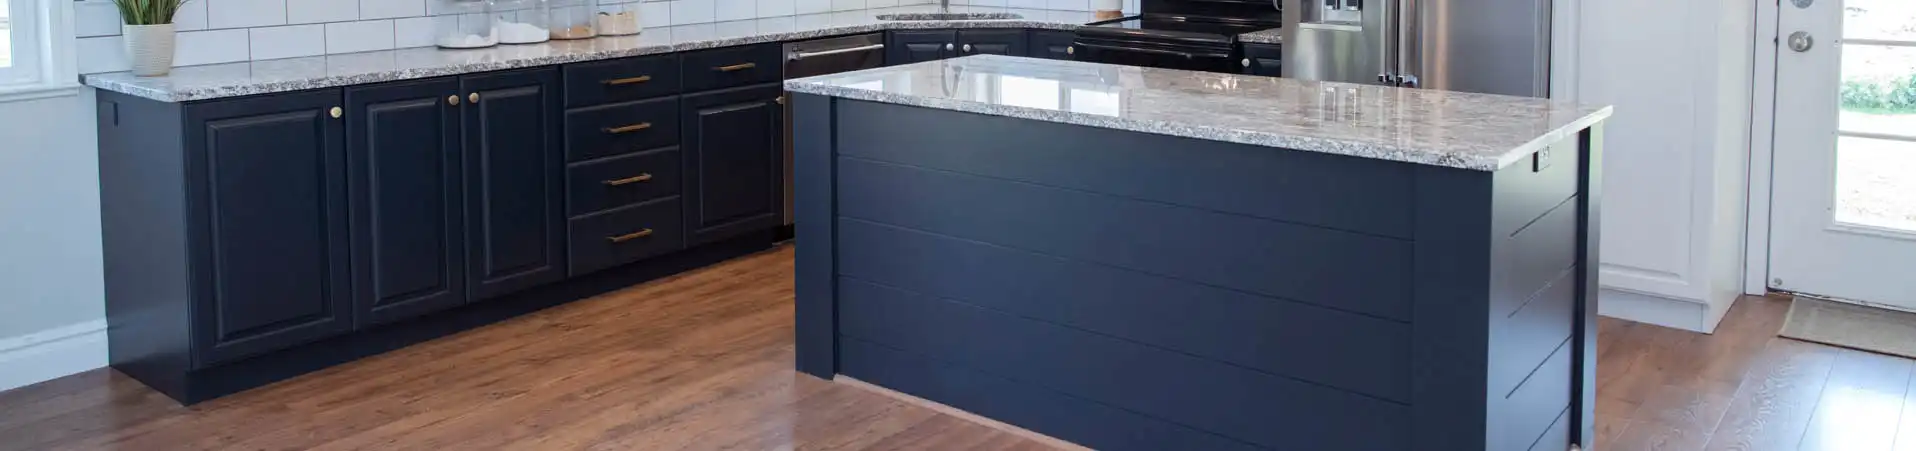 Photo of kitchen with custom navy blue paint color